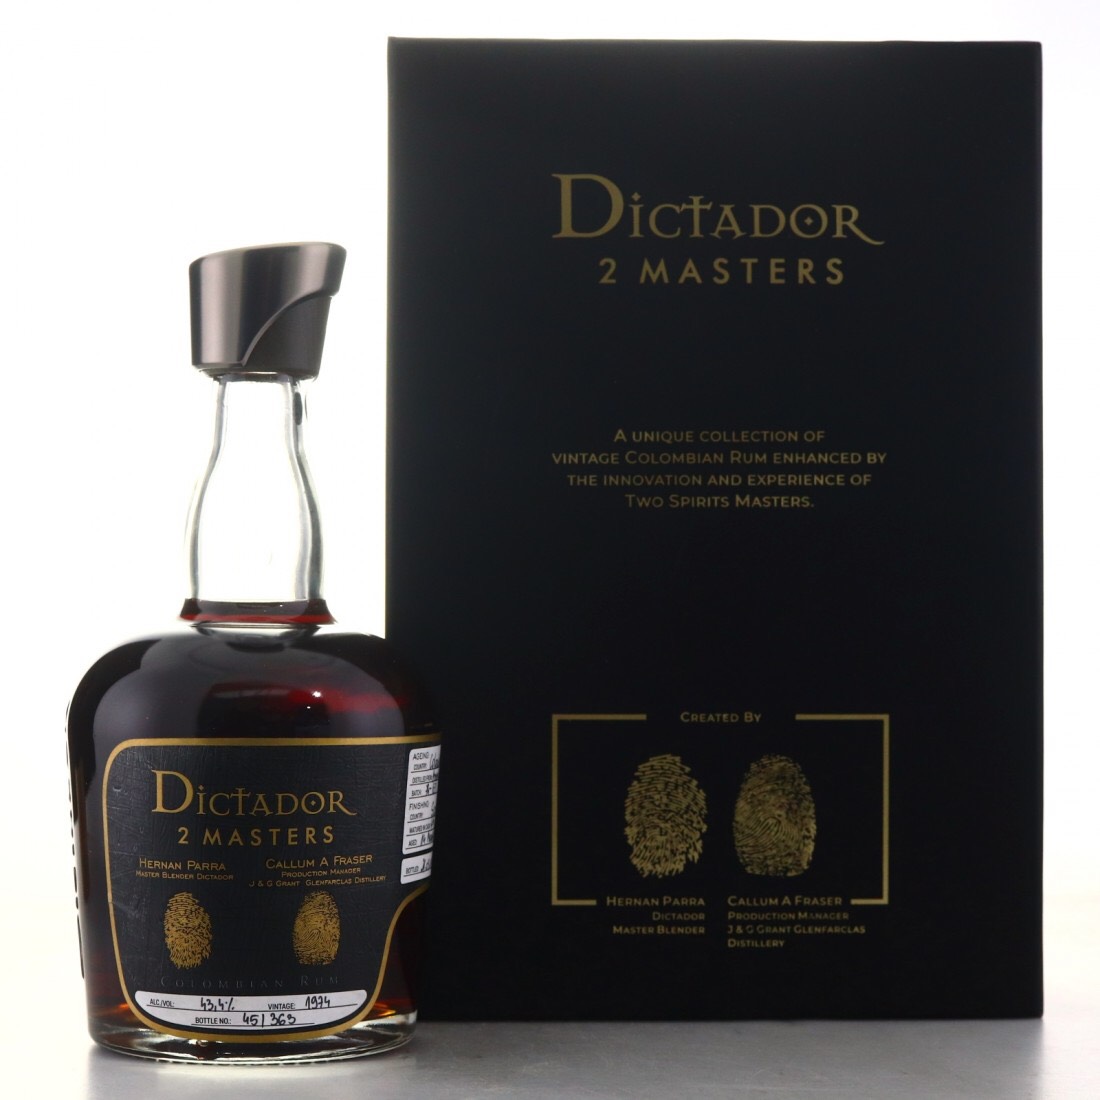 Bottle image of Dictador 2 Masters